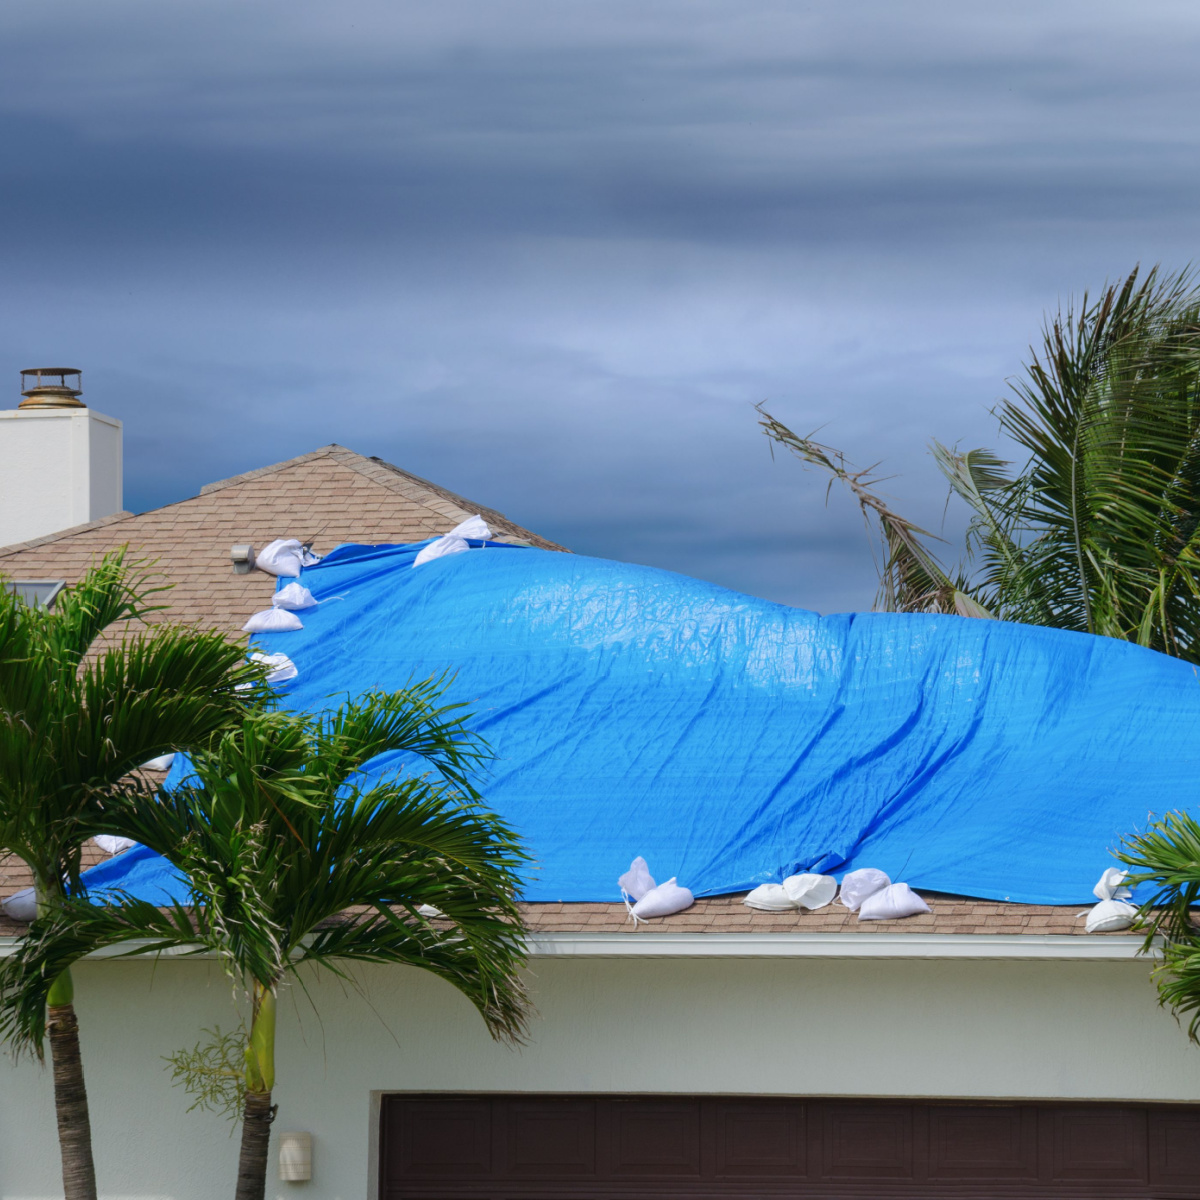 A roof damaged by a hurricane